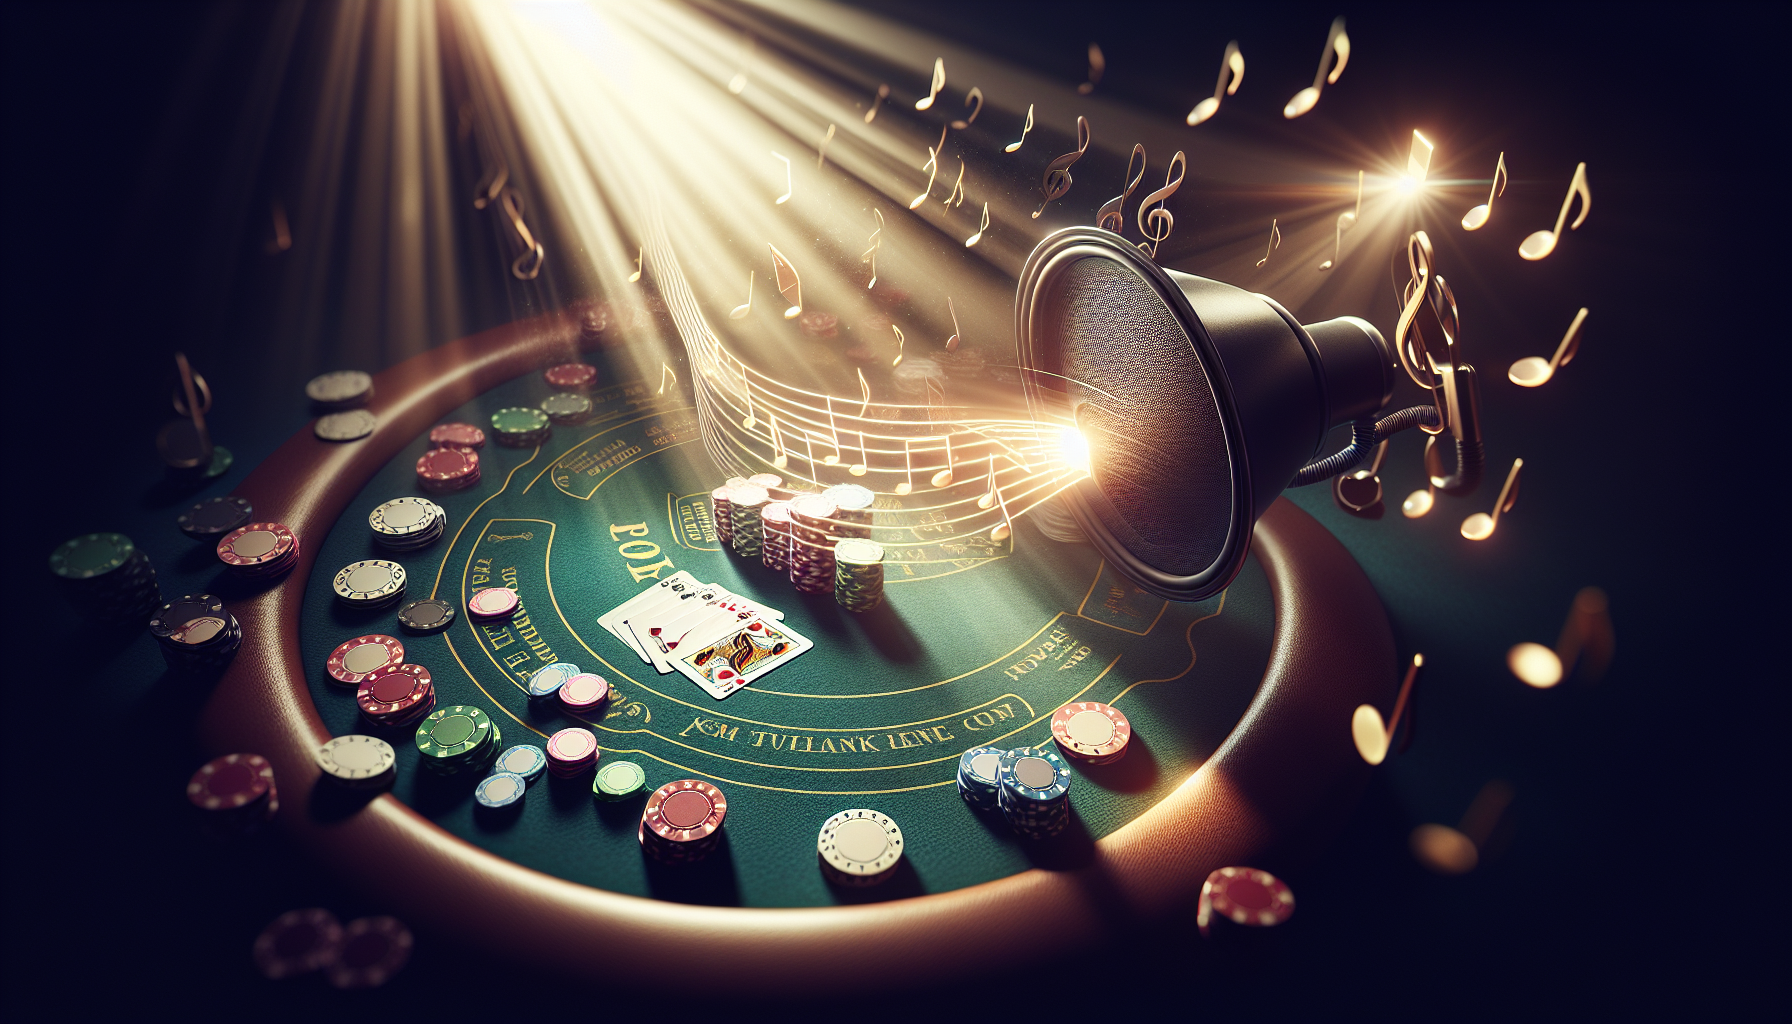 Explore the connection between poker strategies and song lyrics